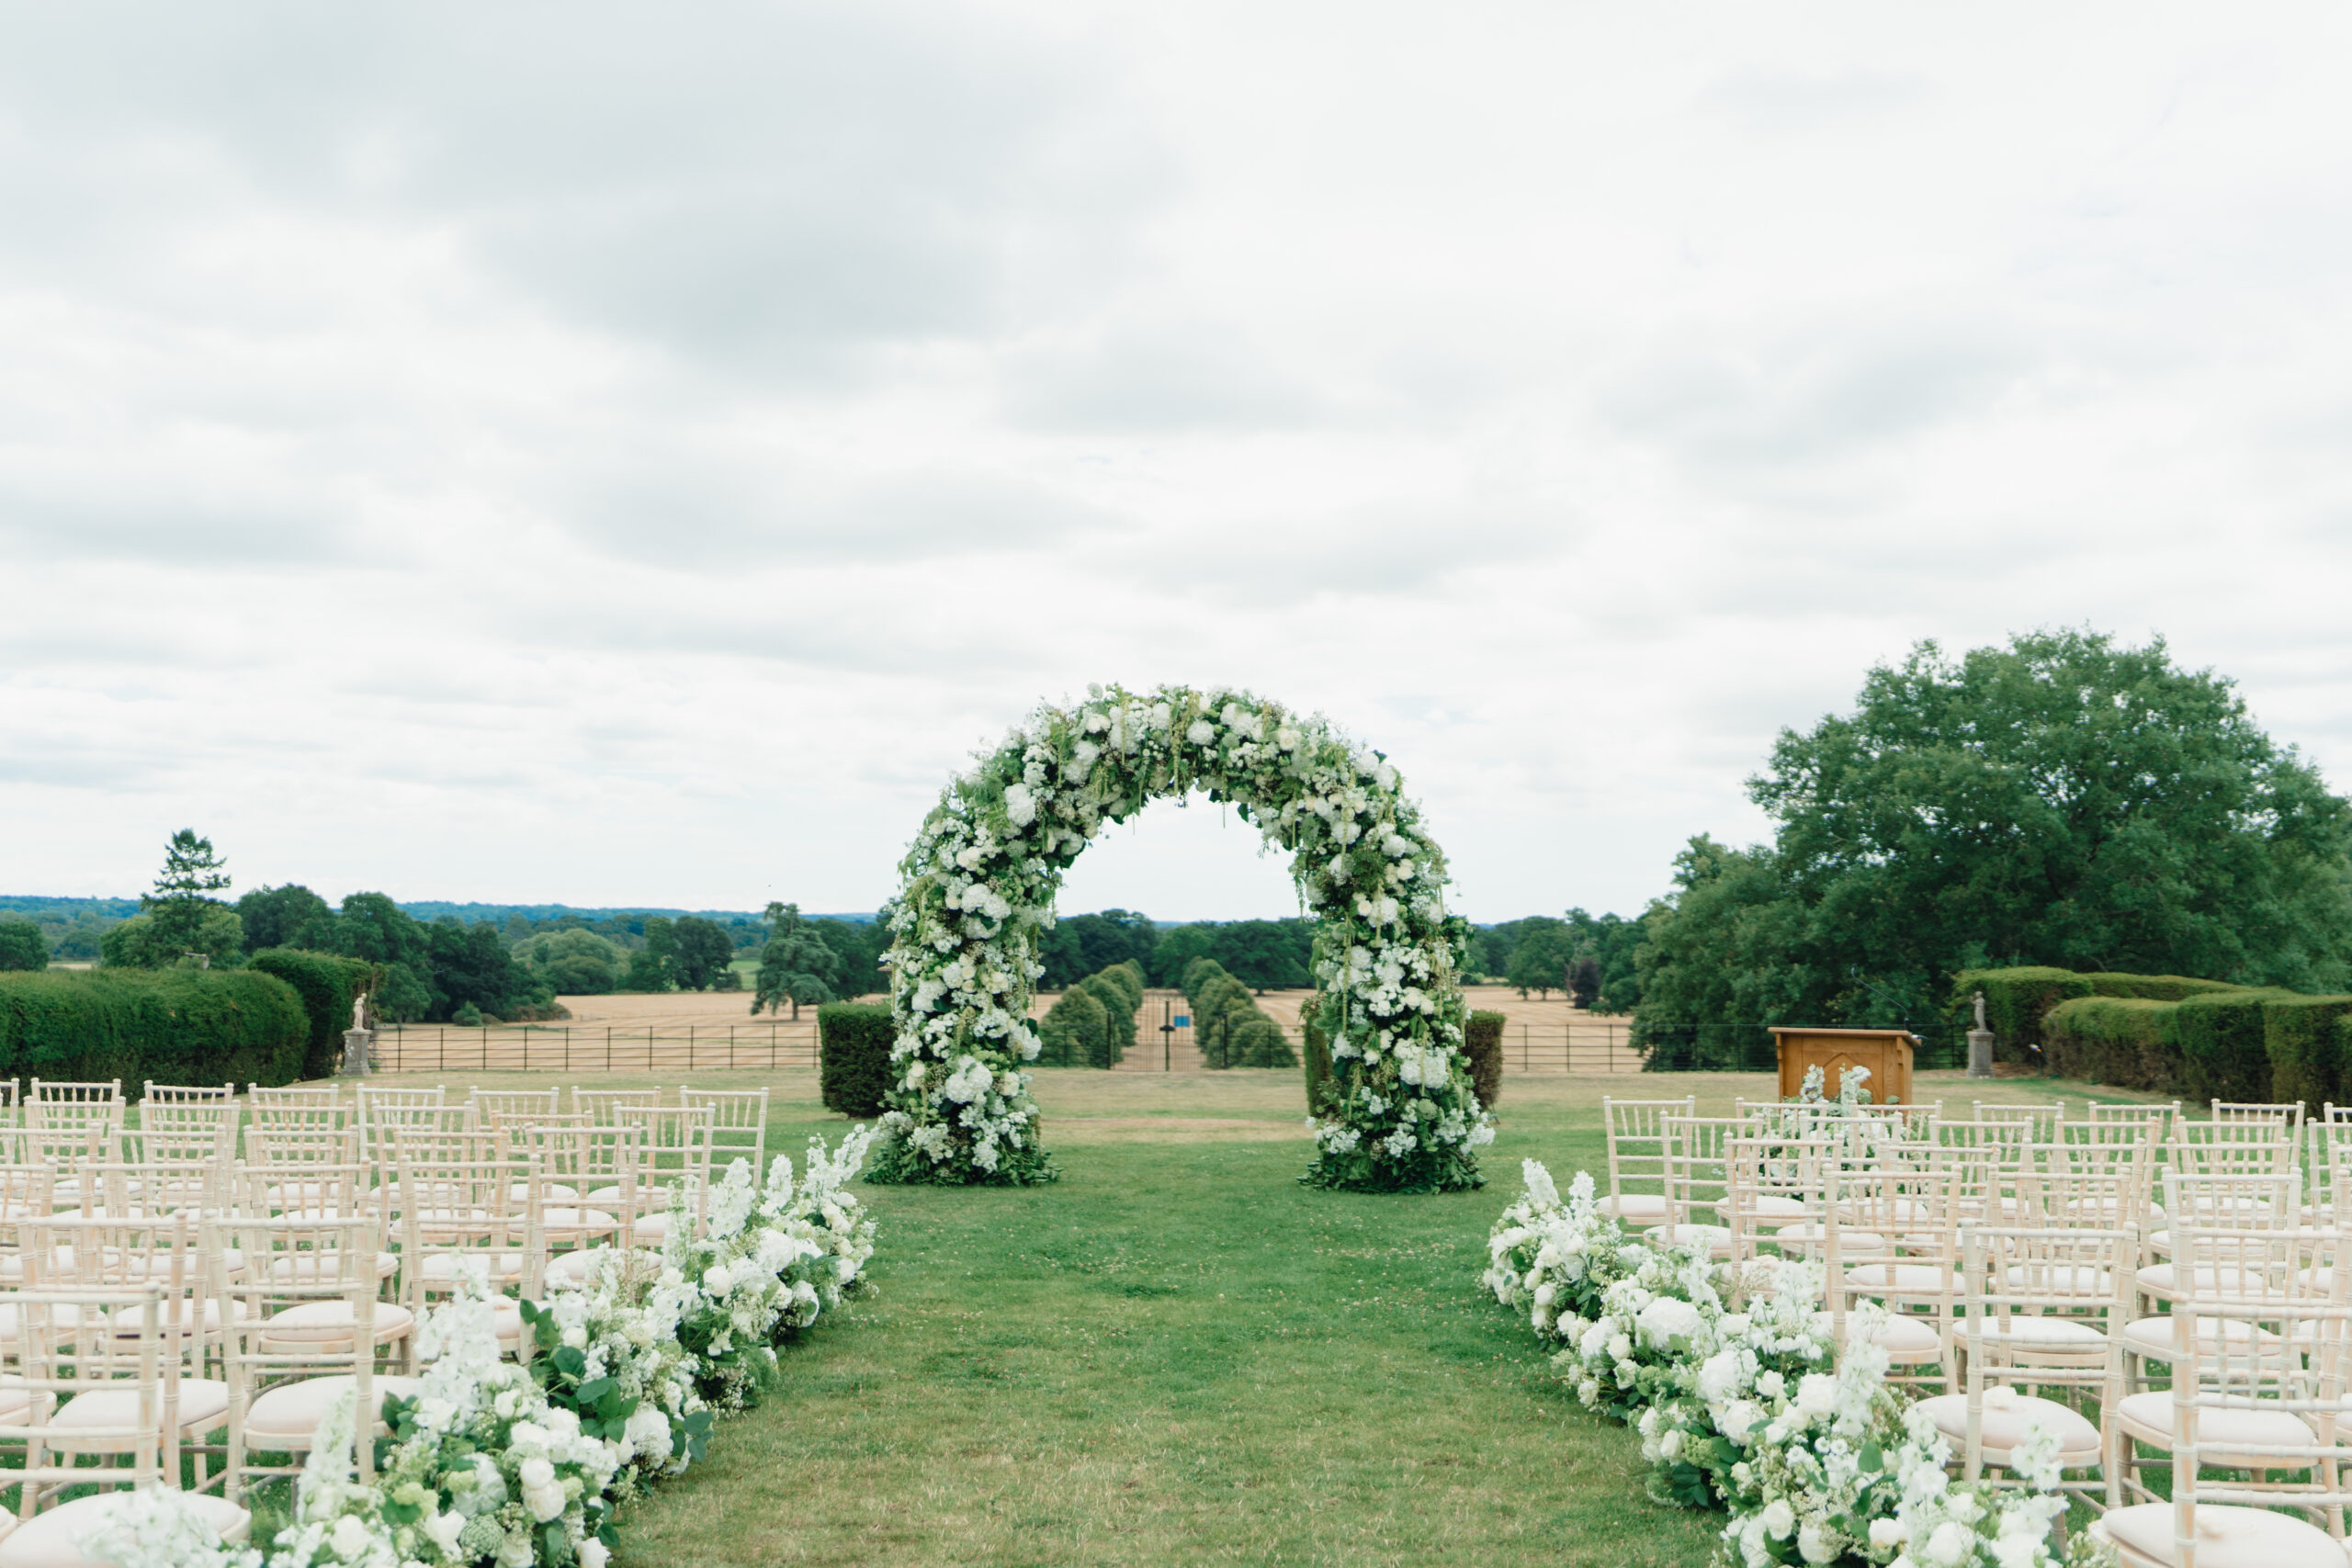 Outside English countryside wedding set up with green and white floral arch